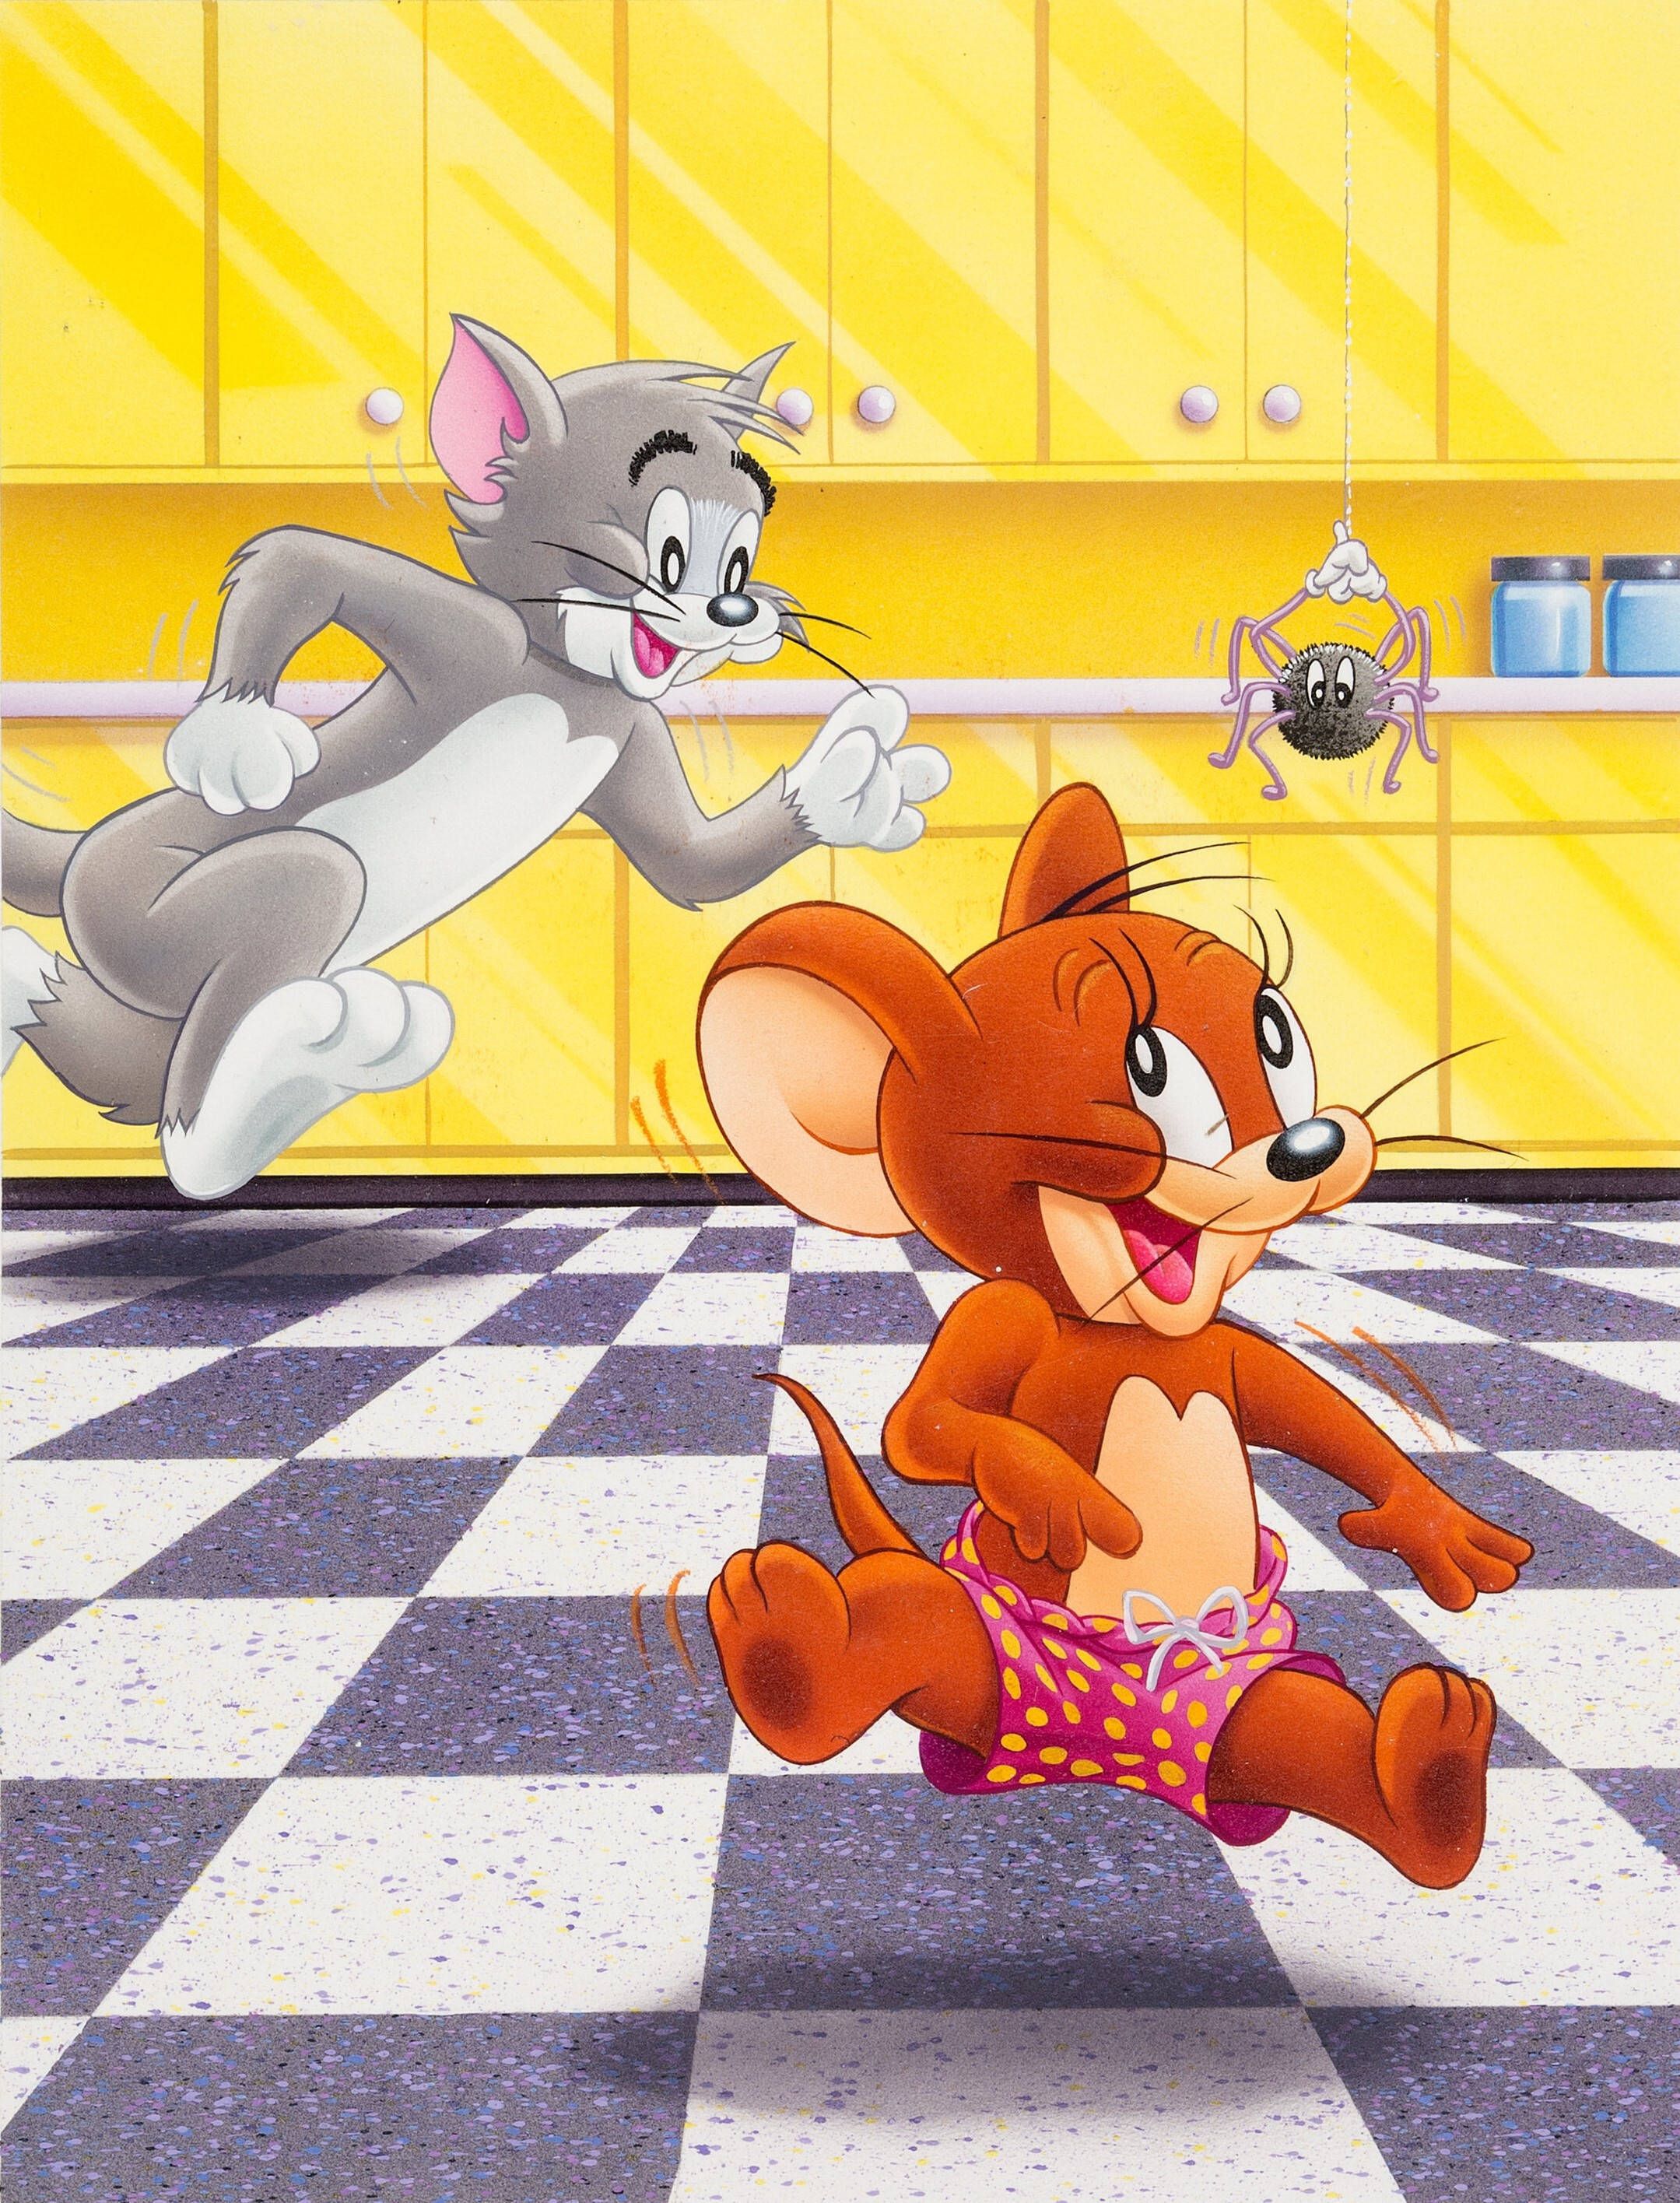 Jerry and Tom chase each other in the kitchen - Tom and Jerry